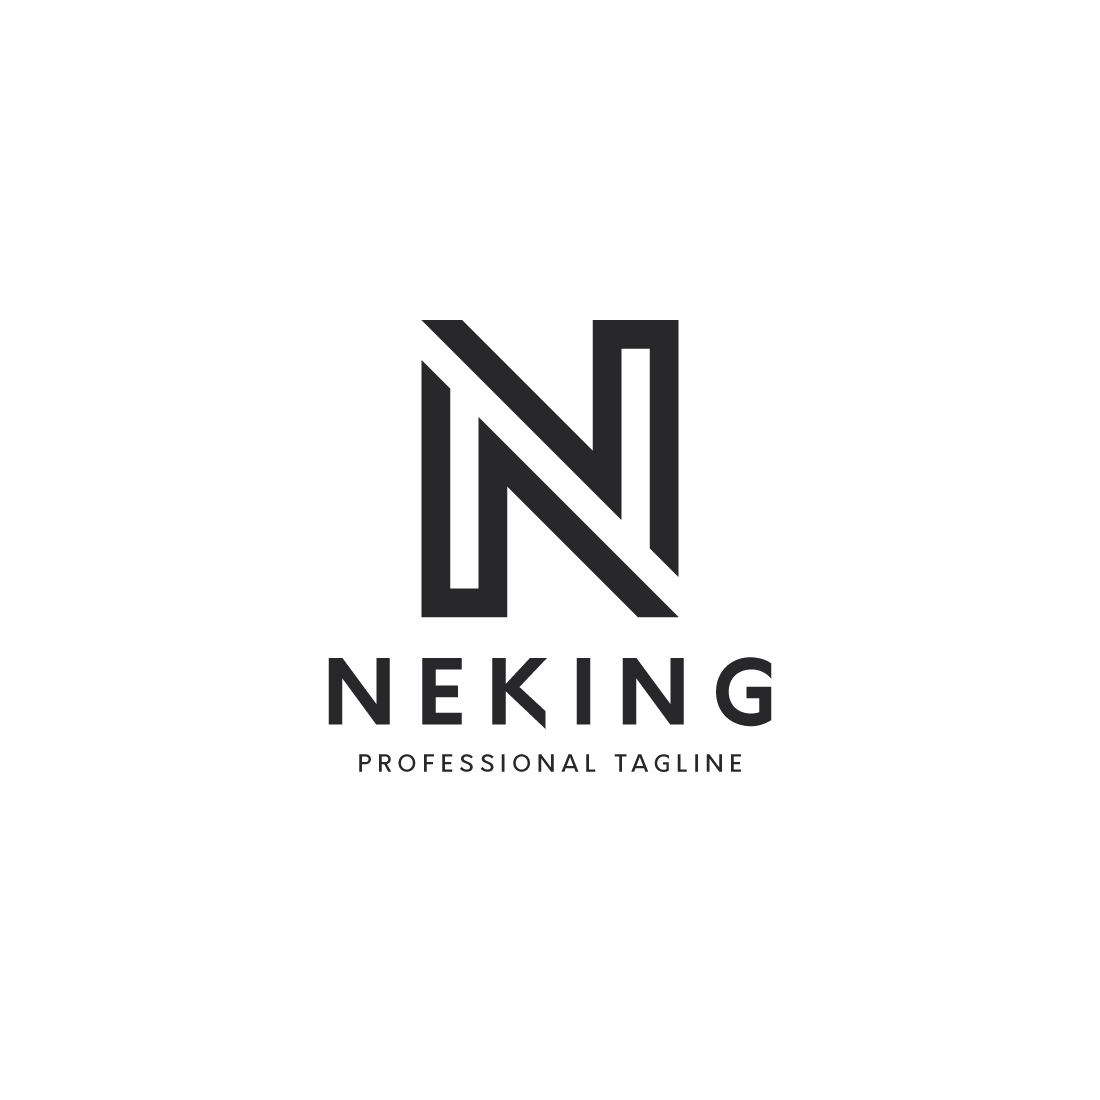 Black and white logo for a professional tagline.